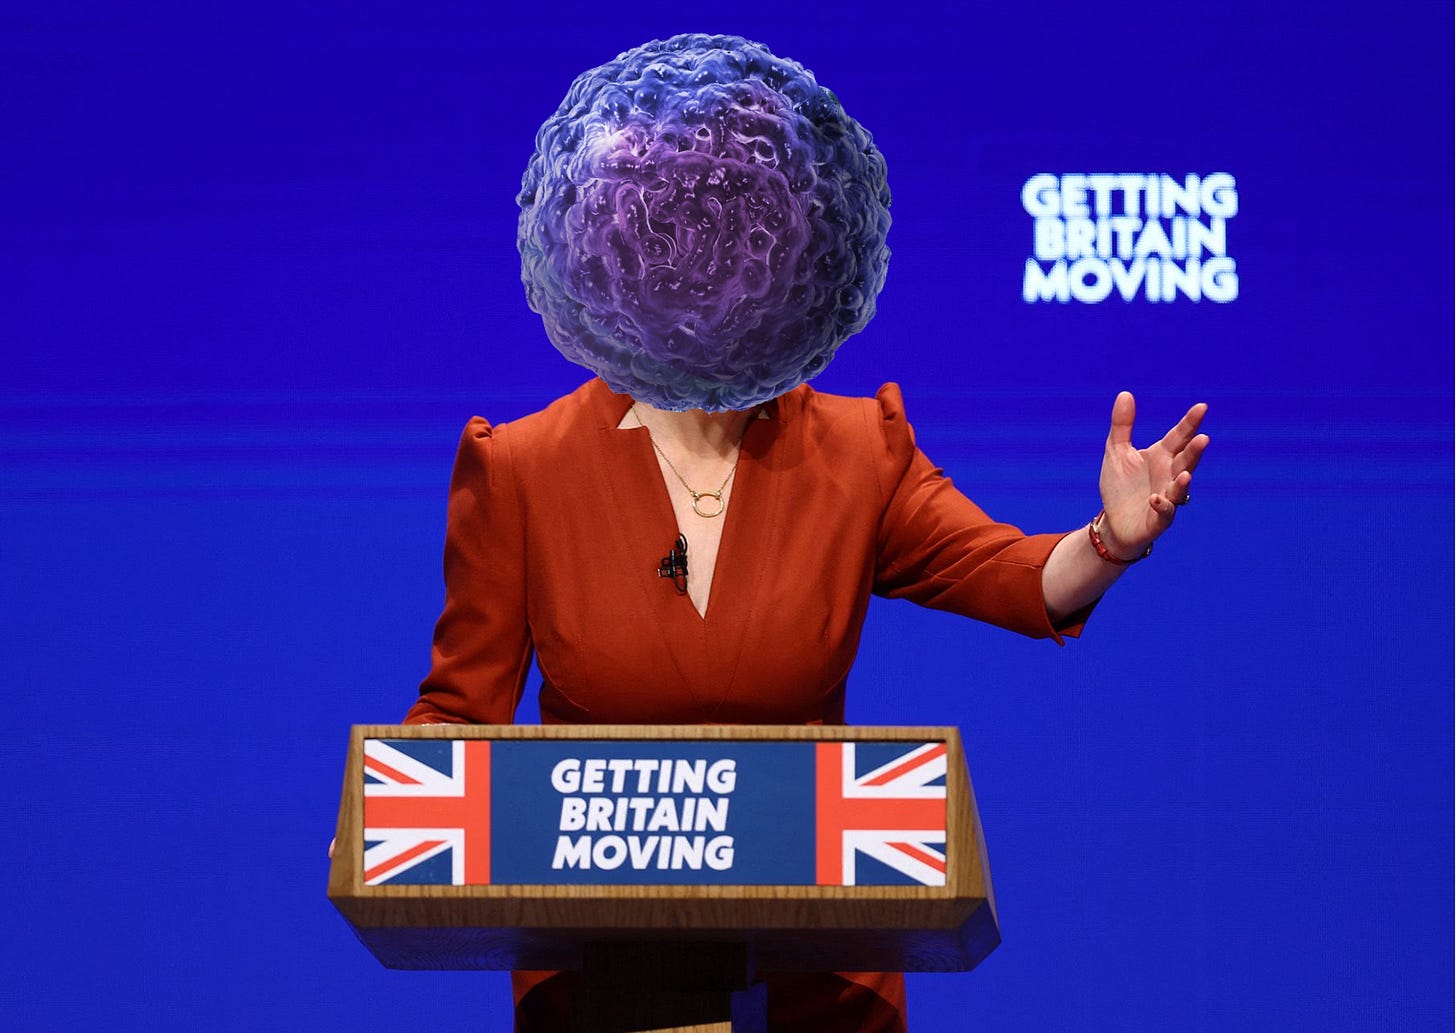 Liz Truss speaking at the Conservative Party Conference, her face replaced by a tumour